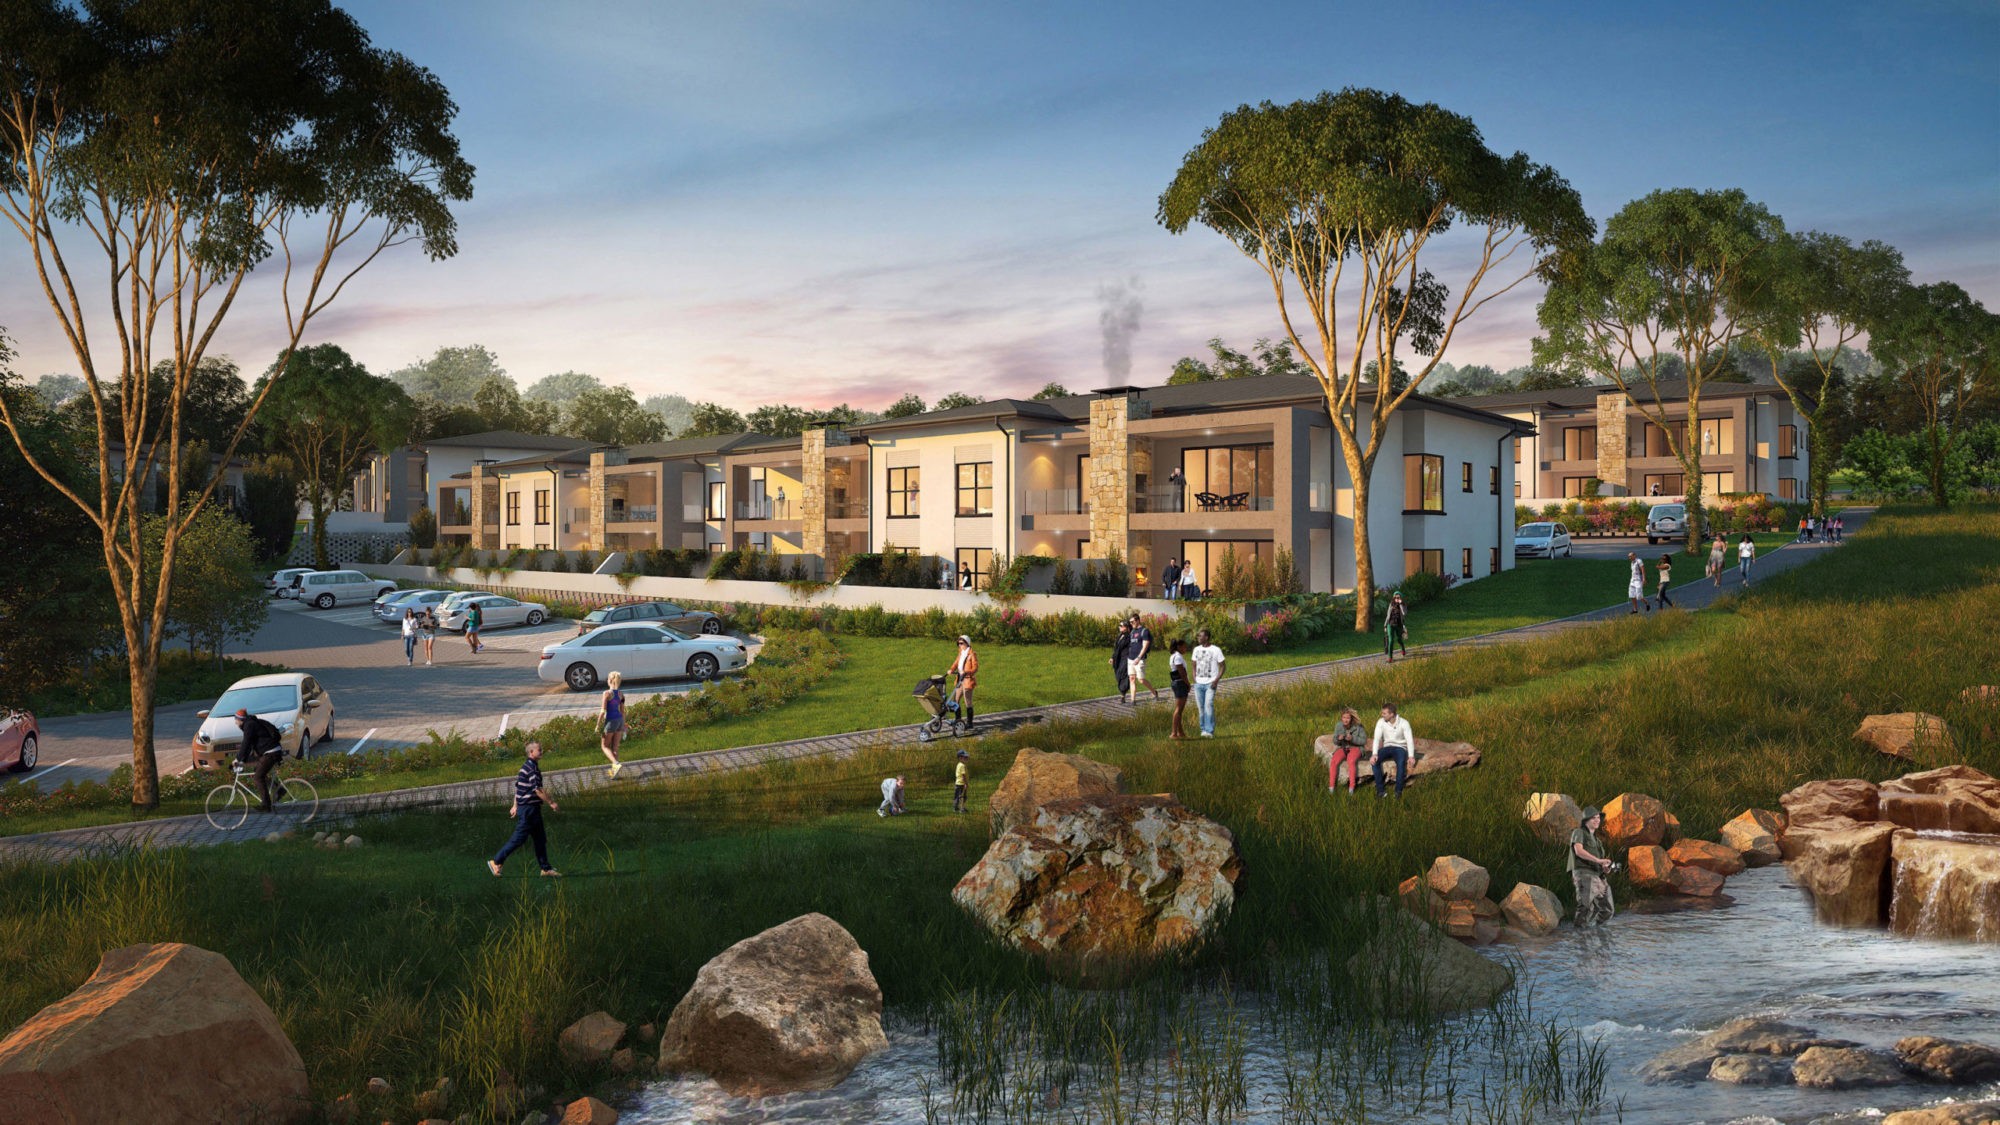 The south of Johannesburg has its fair share of lifestyle estates, but what stands out about these is the proliferation of highly affordable cluster and apartment offerings within these gated communities, offering residents all the facilities of the lifestyle estate but within reach of a young professional’s budget.